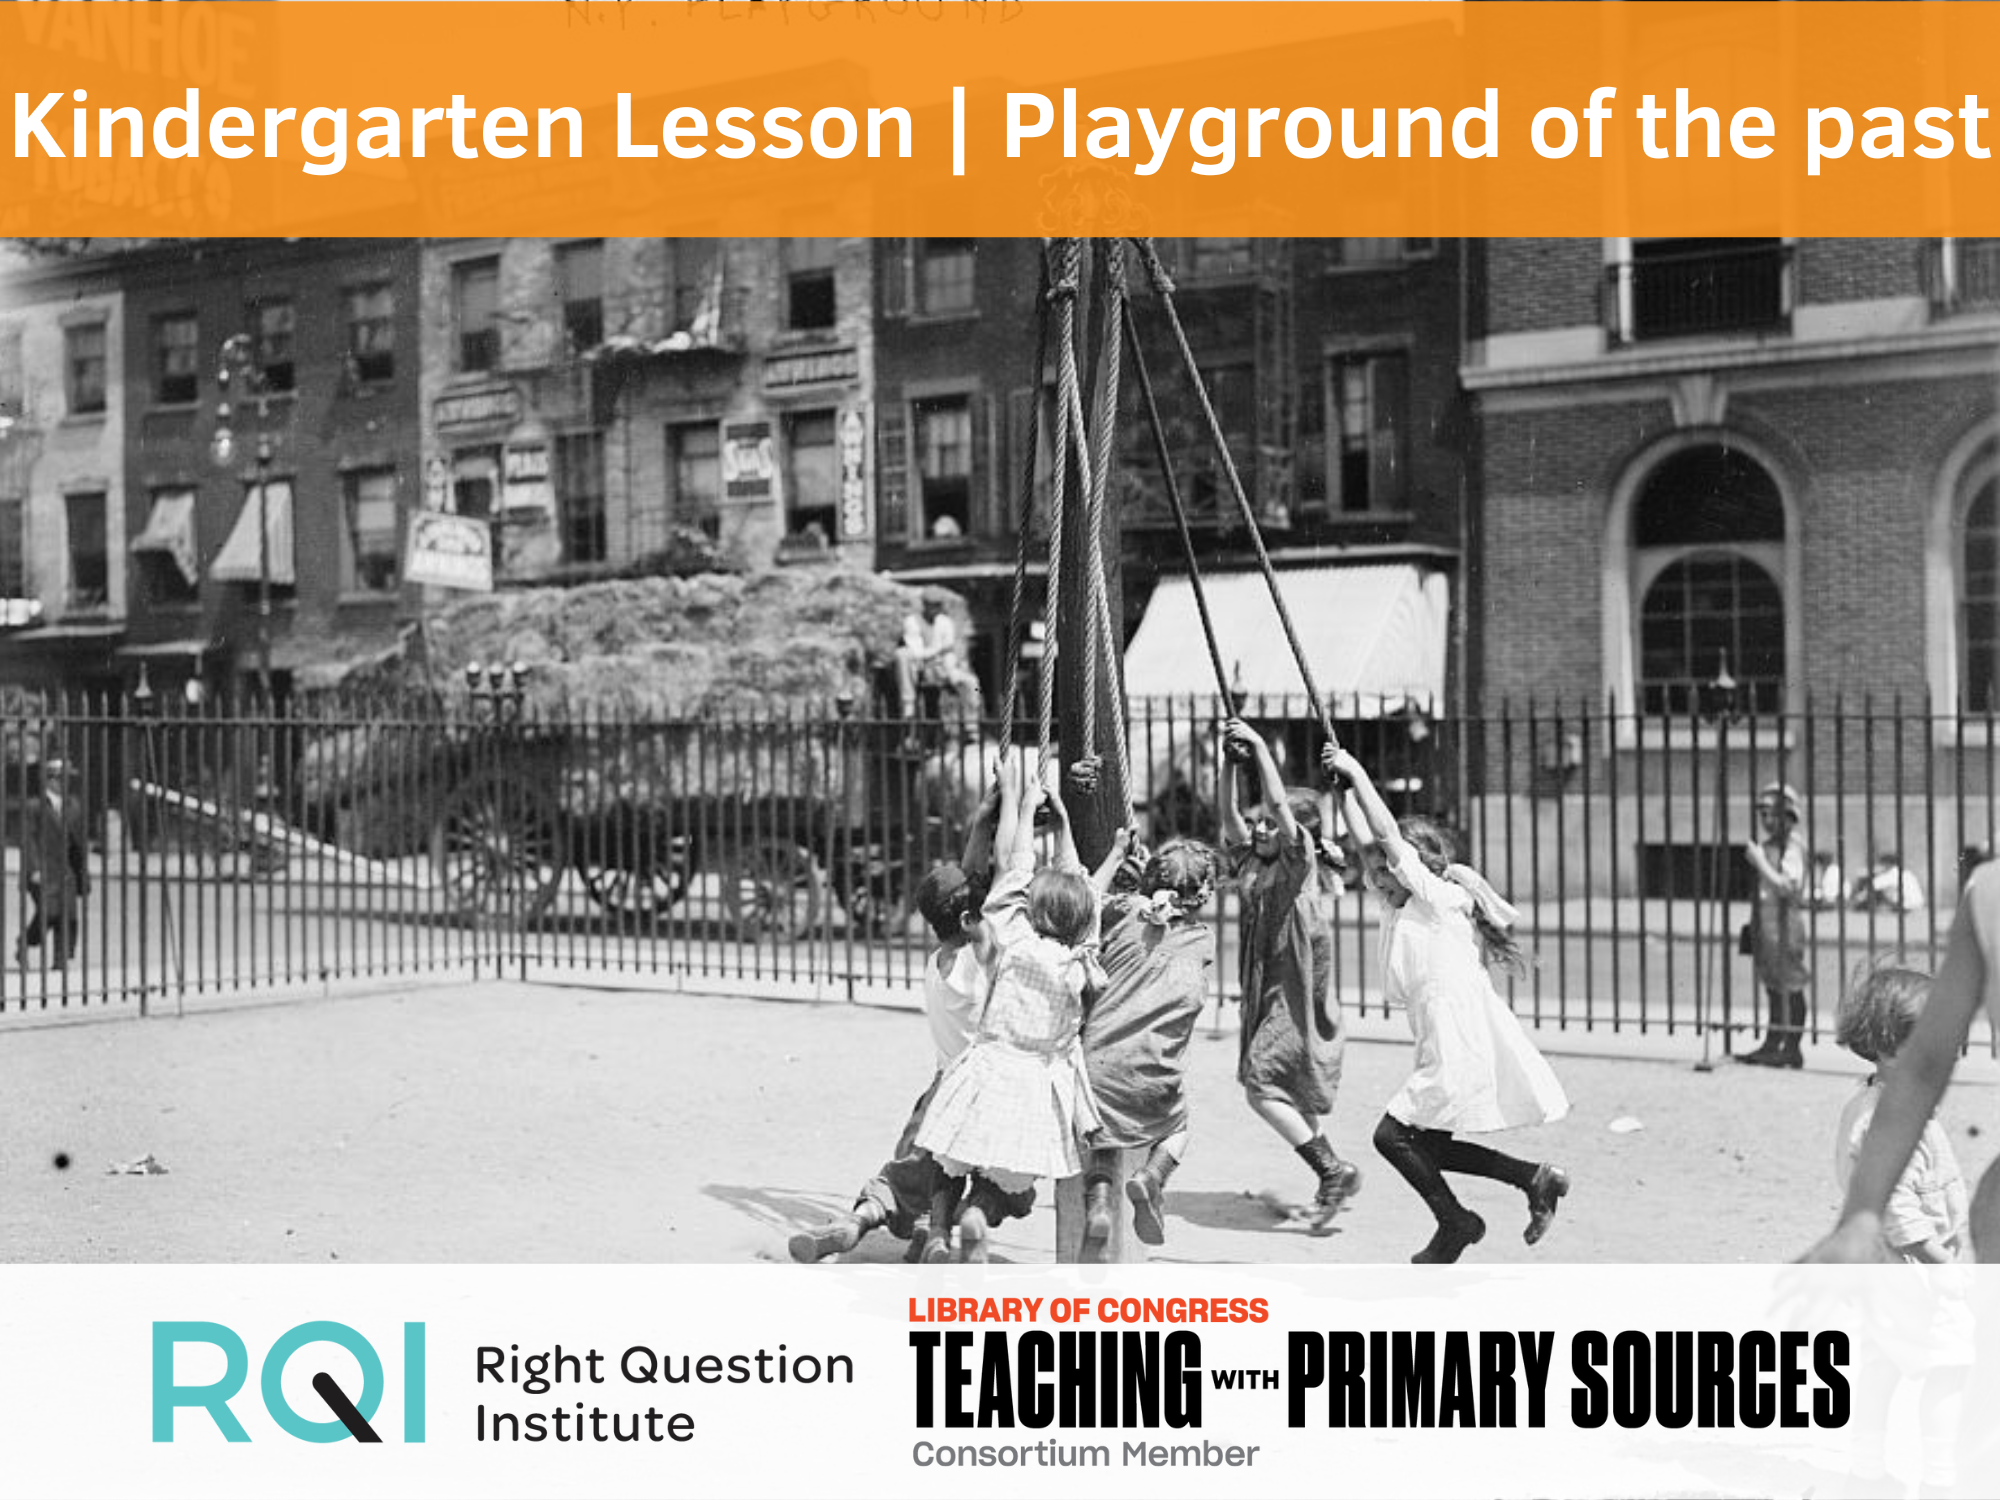 Lesson Snapshot: QFT & Primary Sources in a Kindergarten Classroom